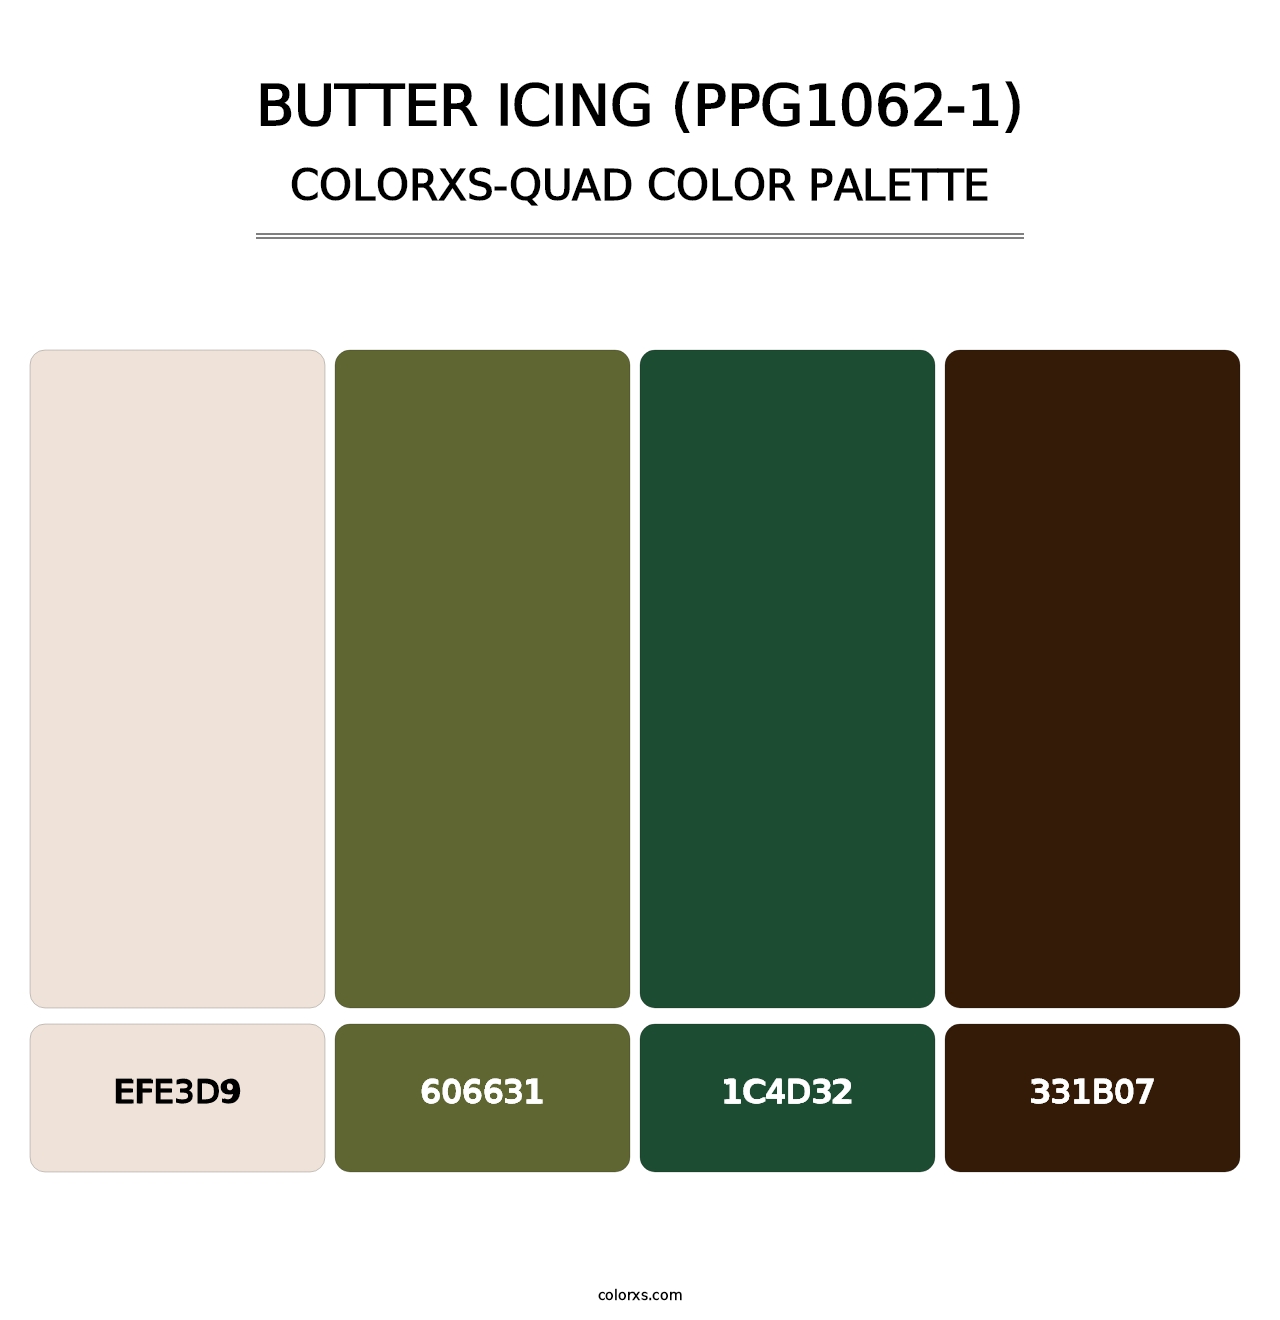 Butter Icing (PPG1062-1) - Colorxs Quad Palette